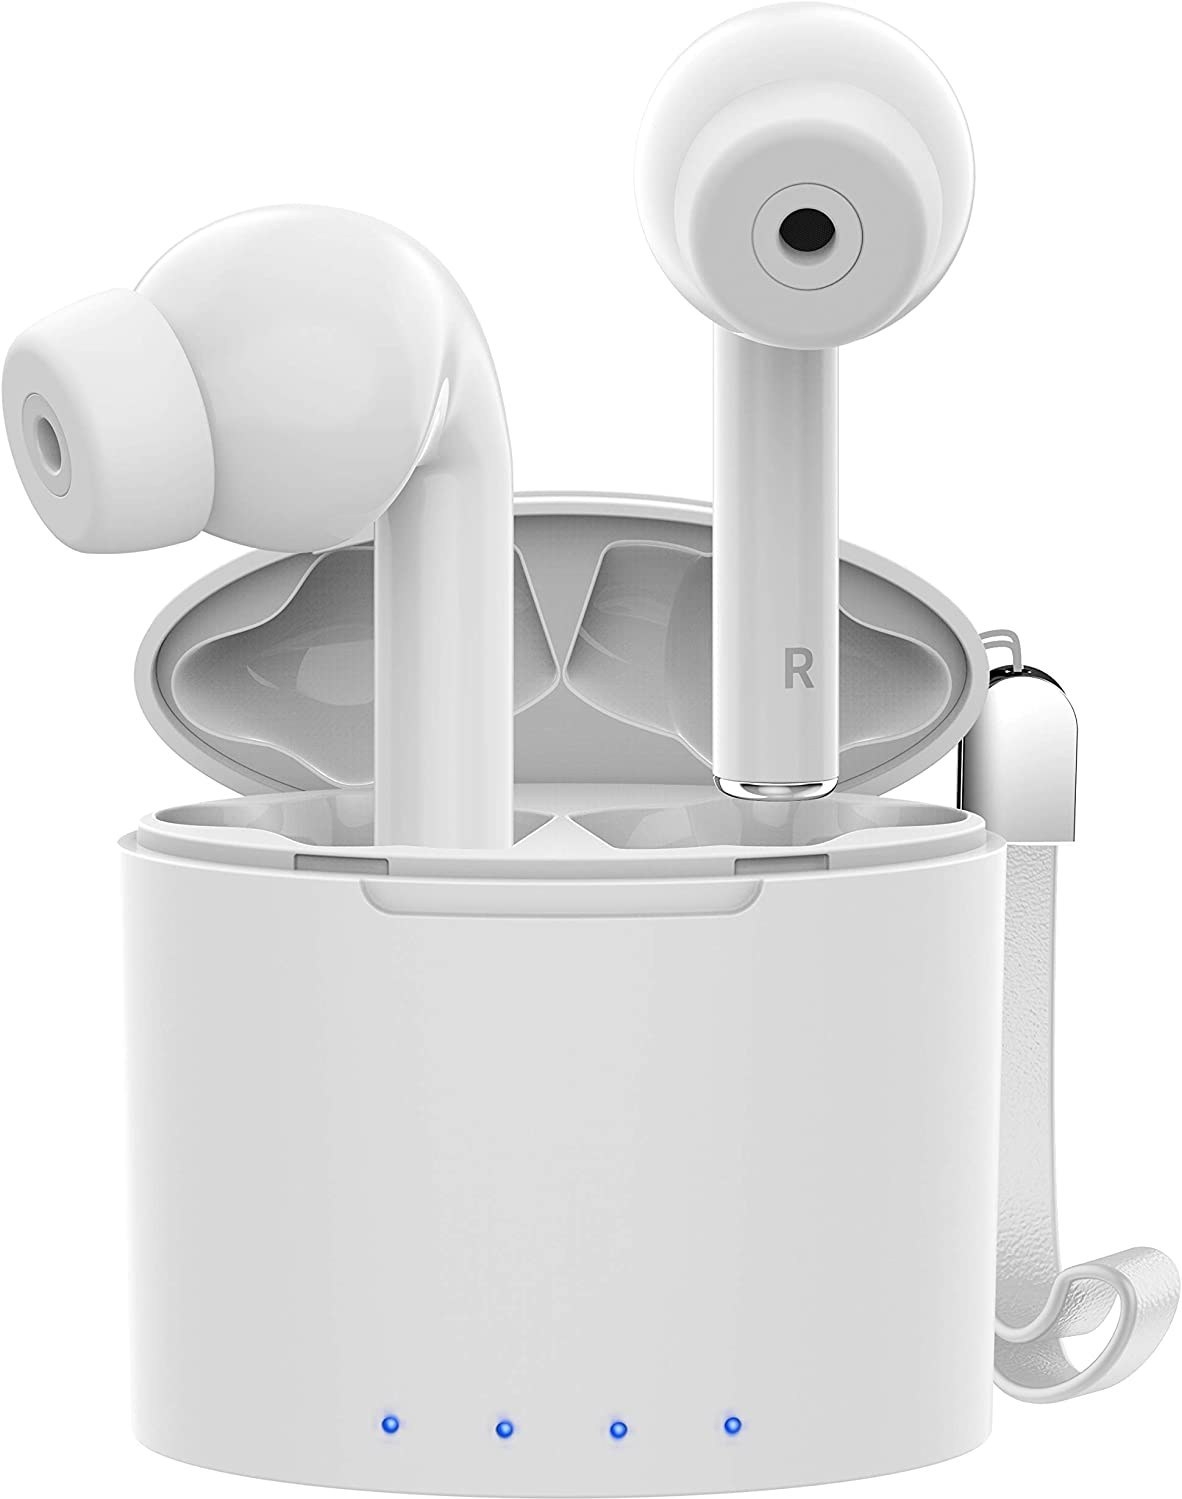  QCY T13 ANC Active Noise Cancelling Wireless Earbuds, Bluetooth  5.3 Headphones with 30H Playtime Charging Case, IPX5 Waterproof Ear Buds  for iPhone and Android, White : Electronics